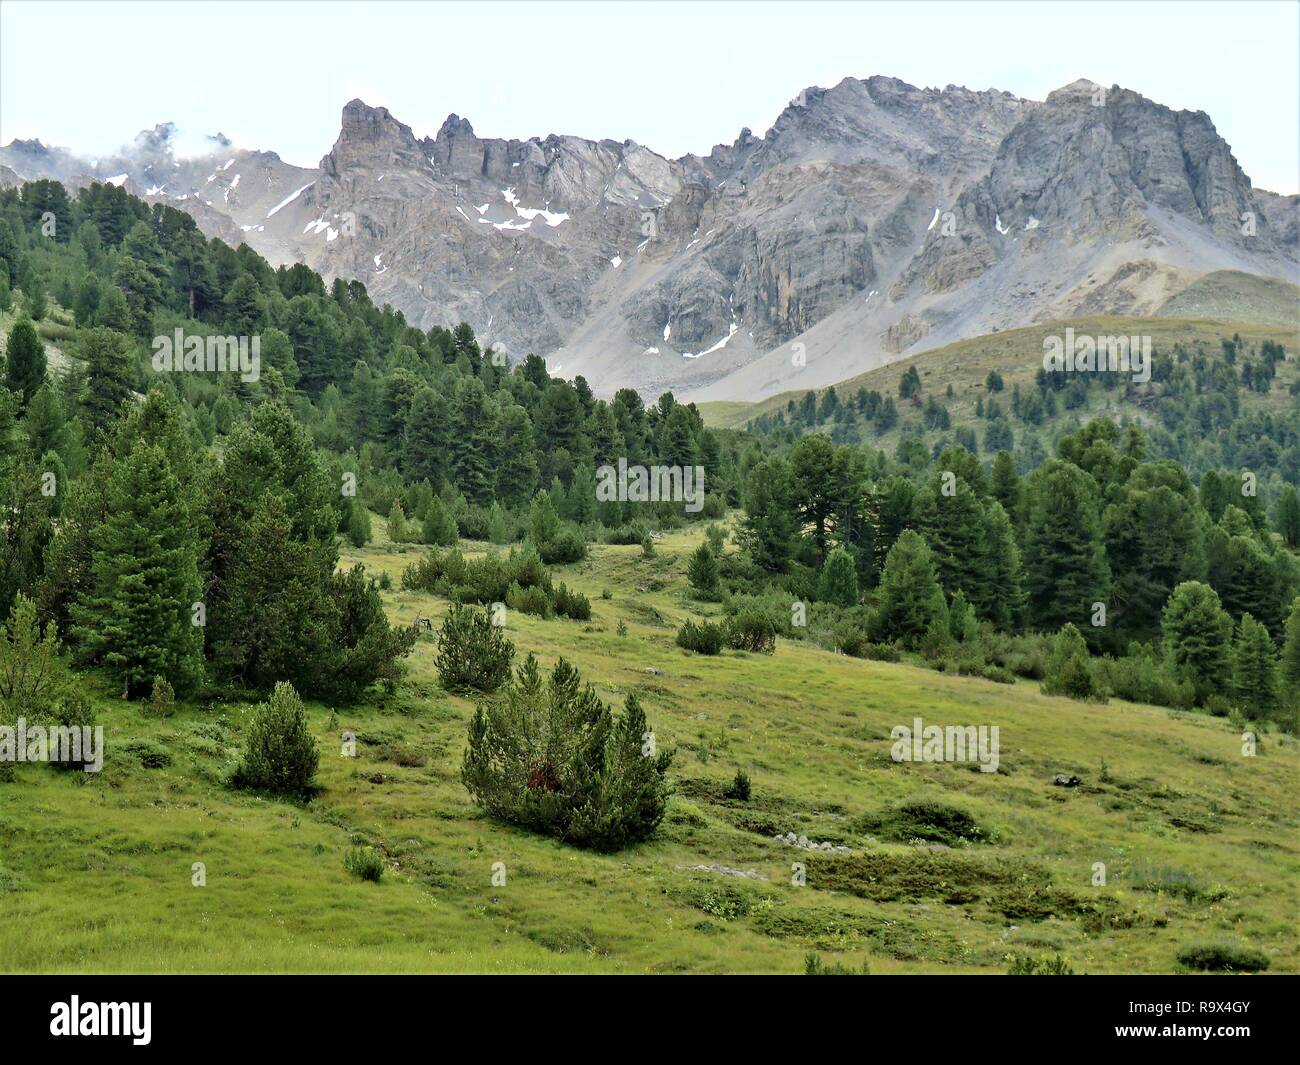 Impressive mountain range, pine forest and alpine meadow near Scuol in the Lower Engadine, Switzerland Stock Photo